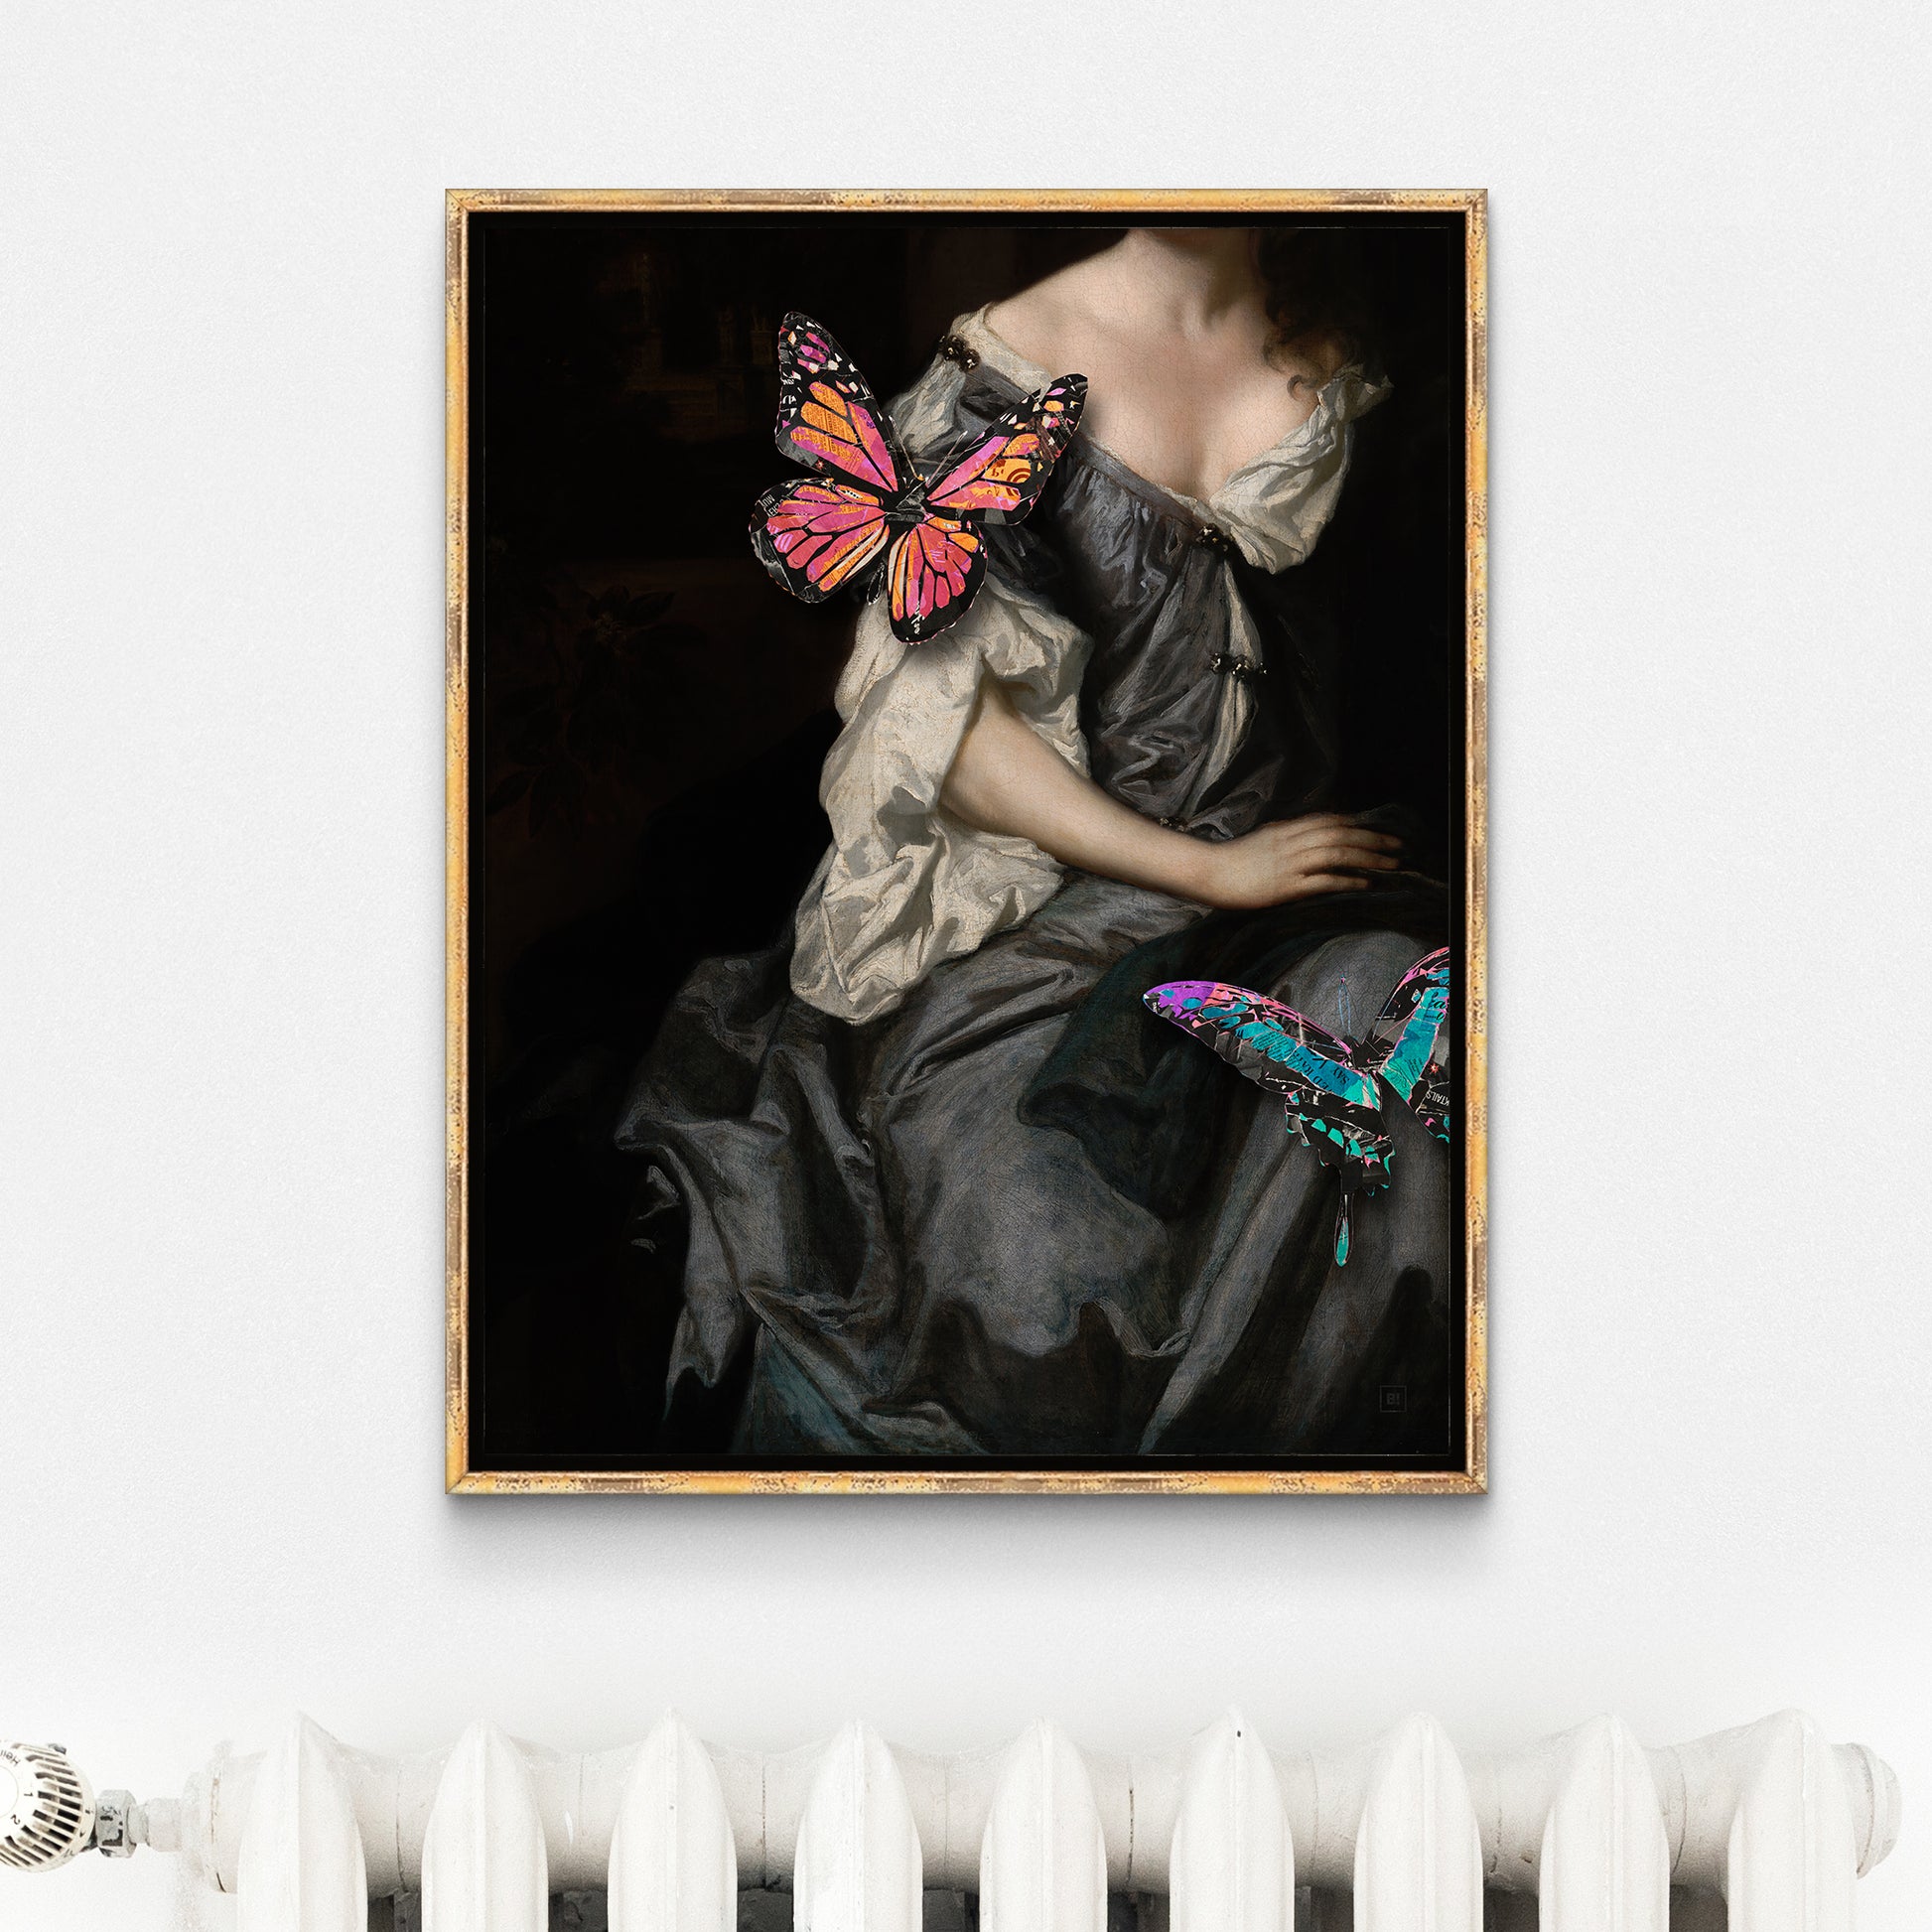 Be inspired by our Victorian portrait with gray dress and butterflies art print. This artwork was printed using the giclée process on archival acid-free paper and is presented in a golden vintage frame that captures its timeless beauty in every detail.